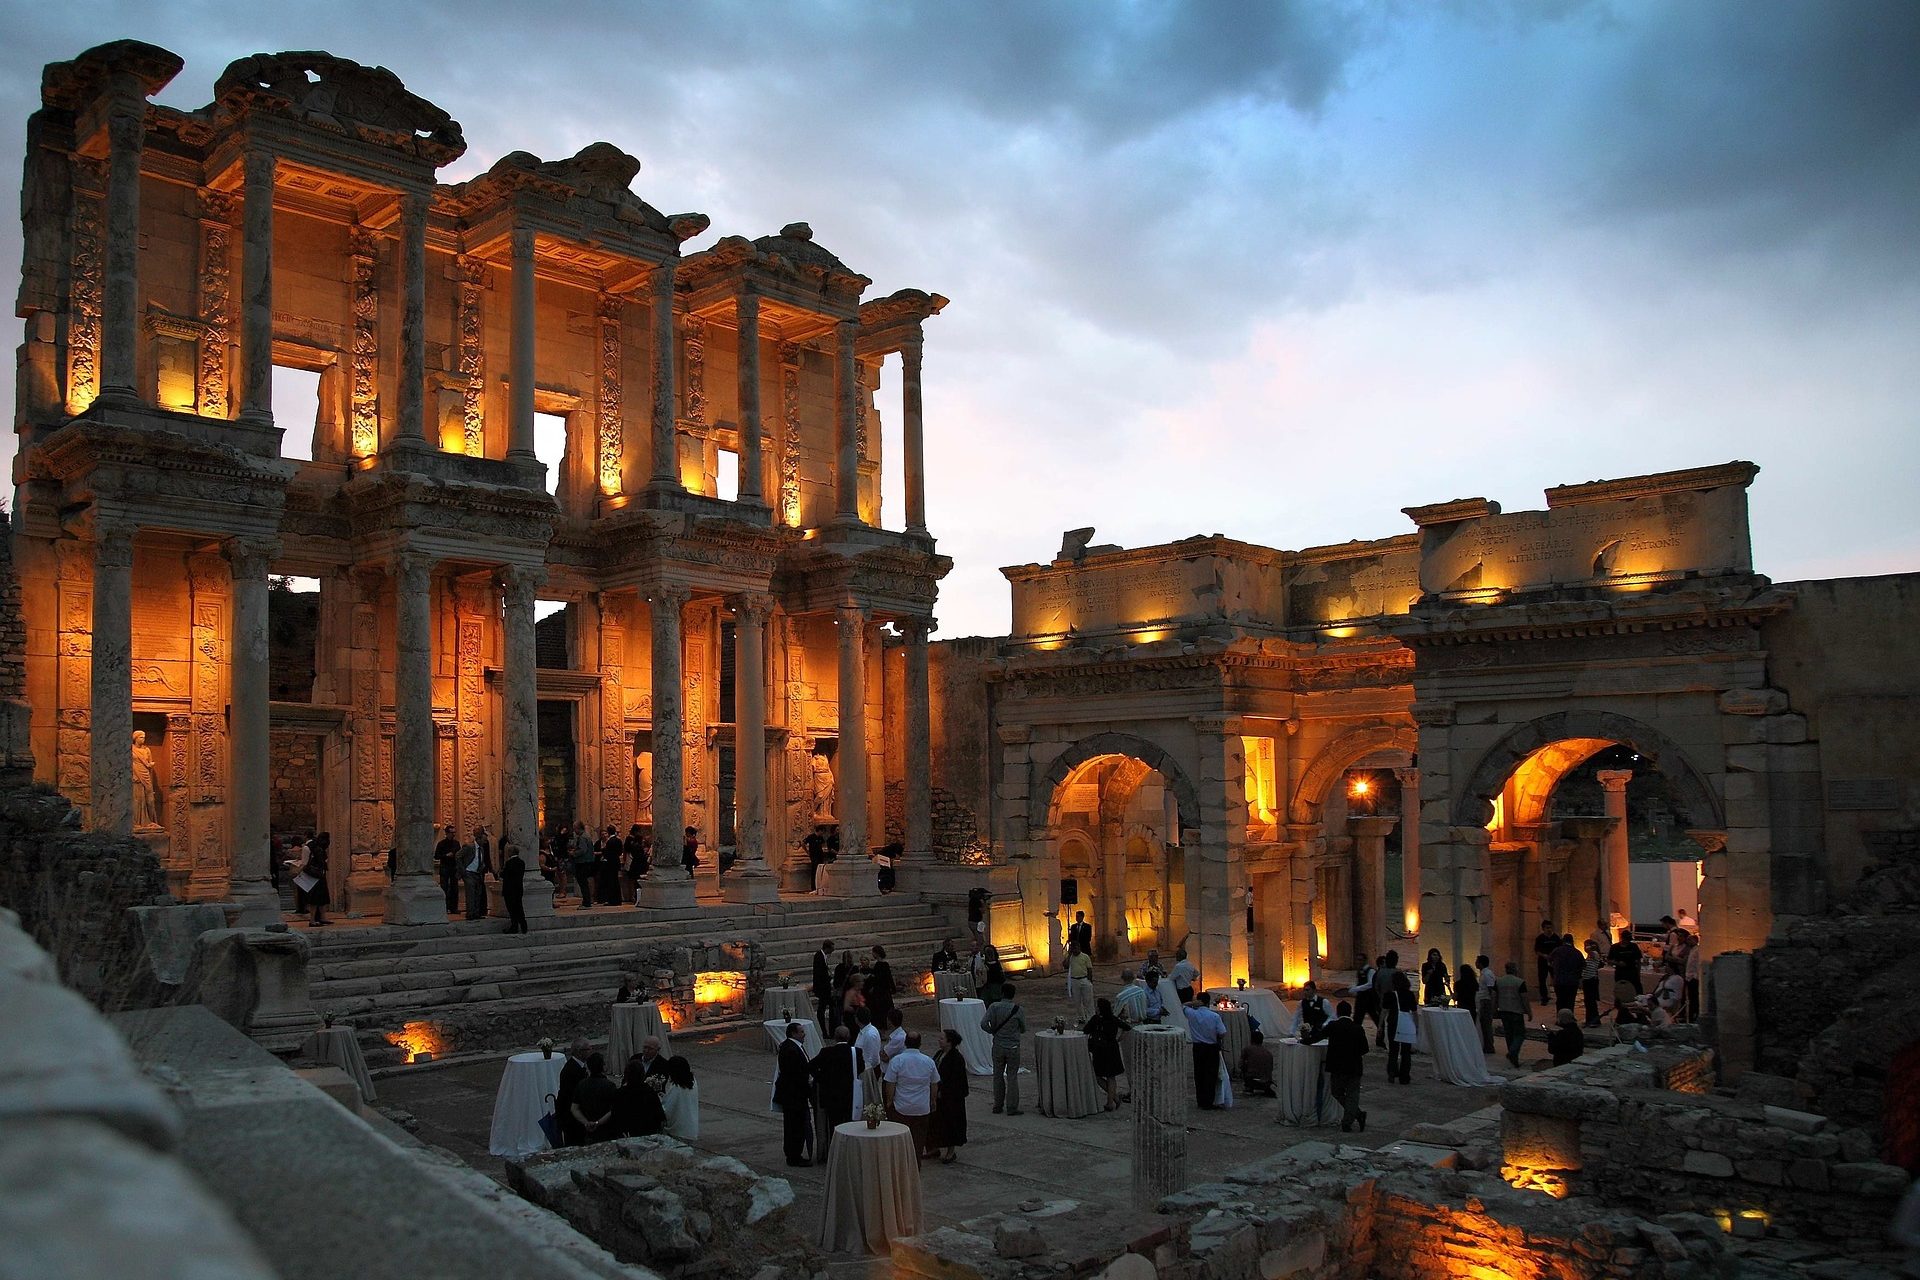 <p>One of the best-preserved ancient cities in the Mediterranean region, Ephesus is also protected by UNESCO. The site is home to well-preserved ruins, such as the Library of Celsus, the Temple of Artemis - one of the original Seven Wonders of the World - and the Theater of Ephesus.</p> <p>Photo: 12019 / Pixabay</p>